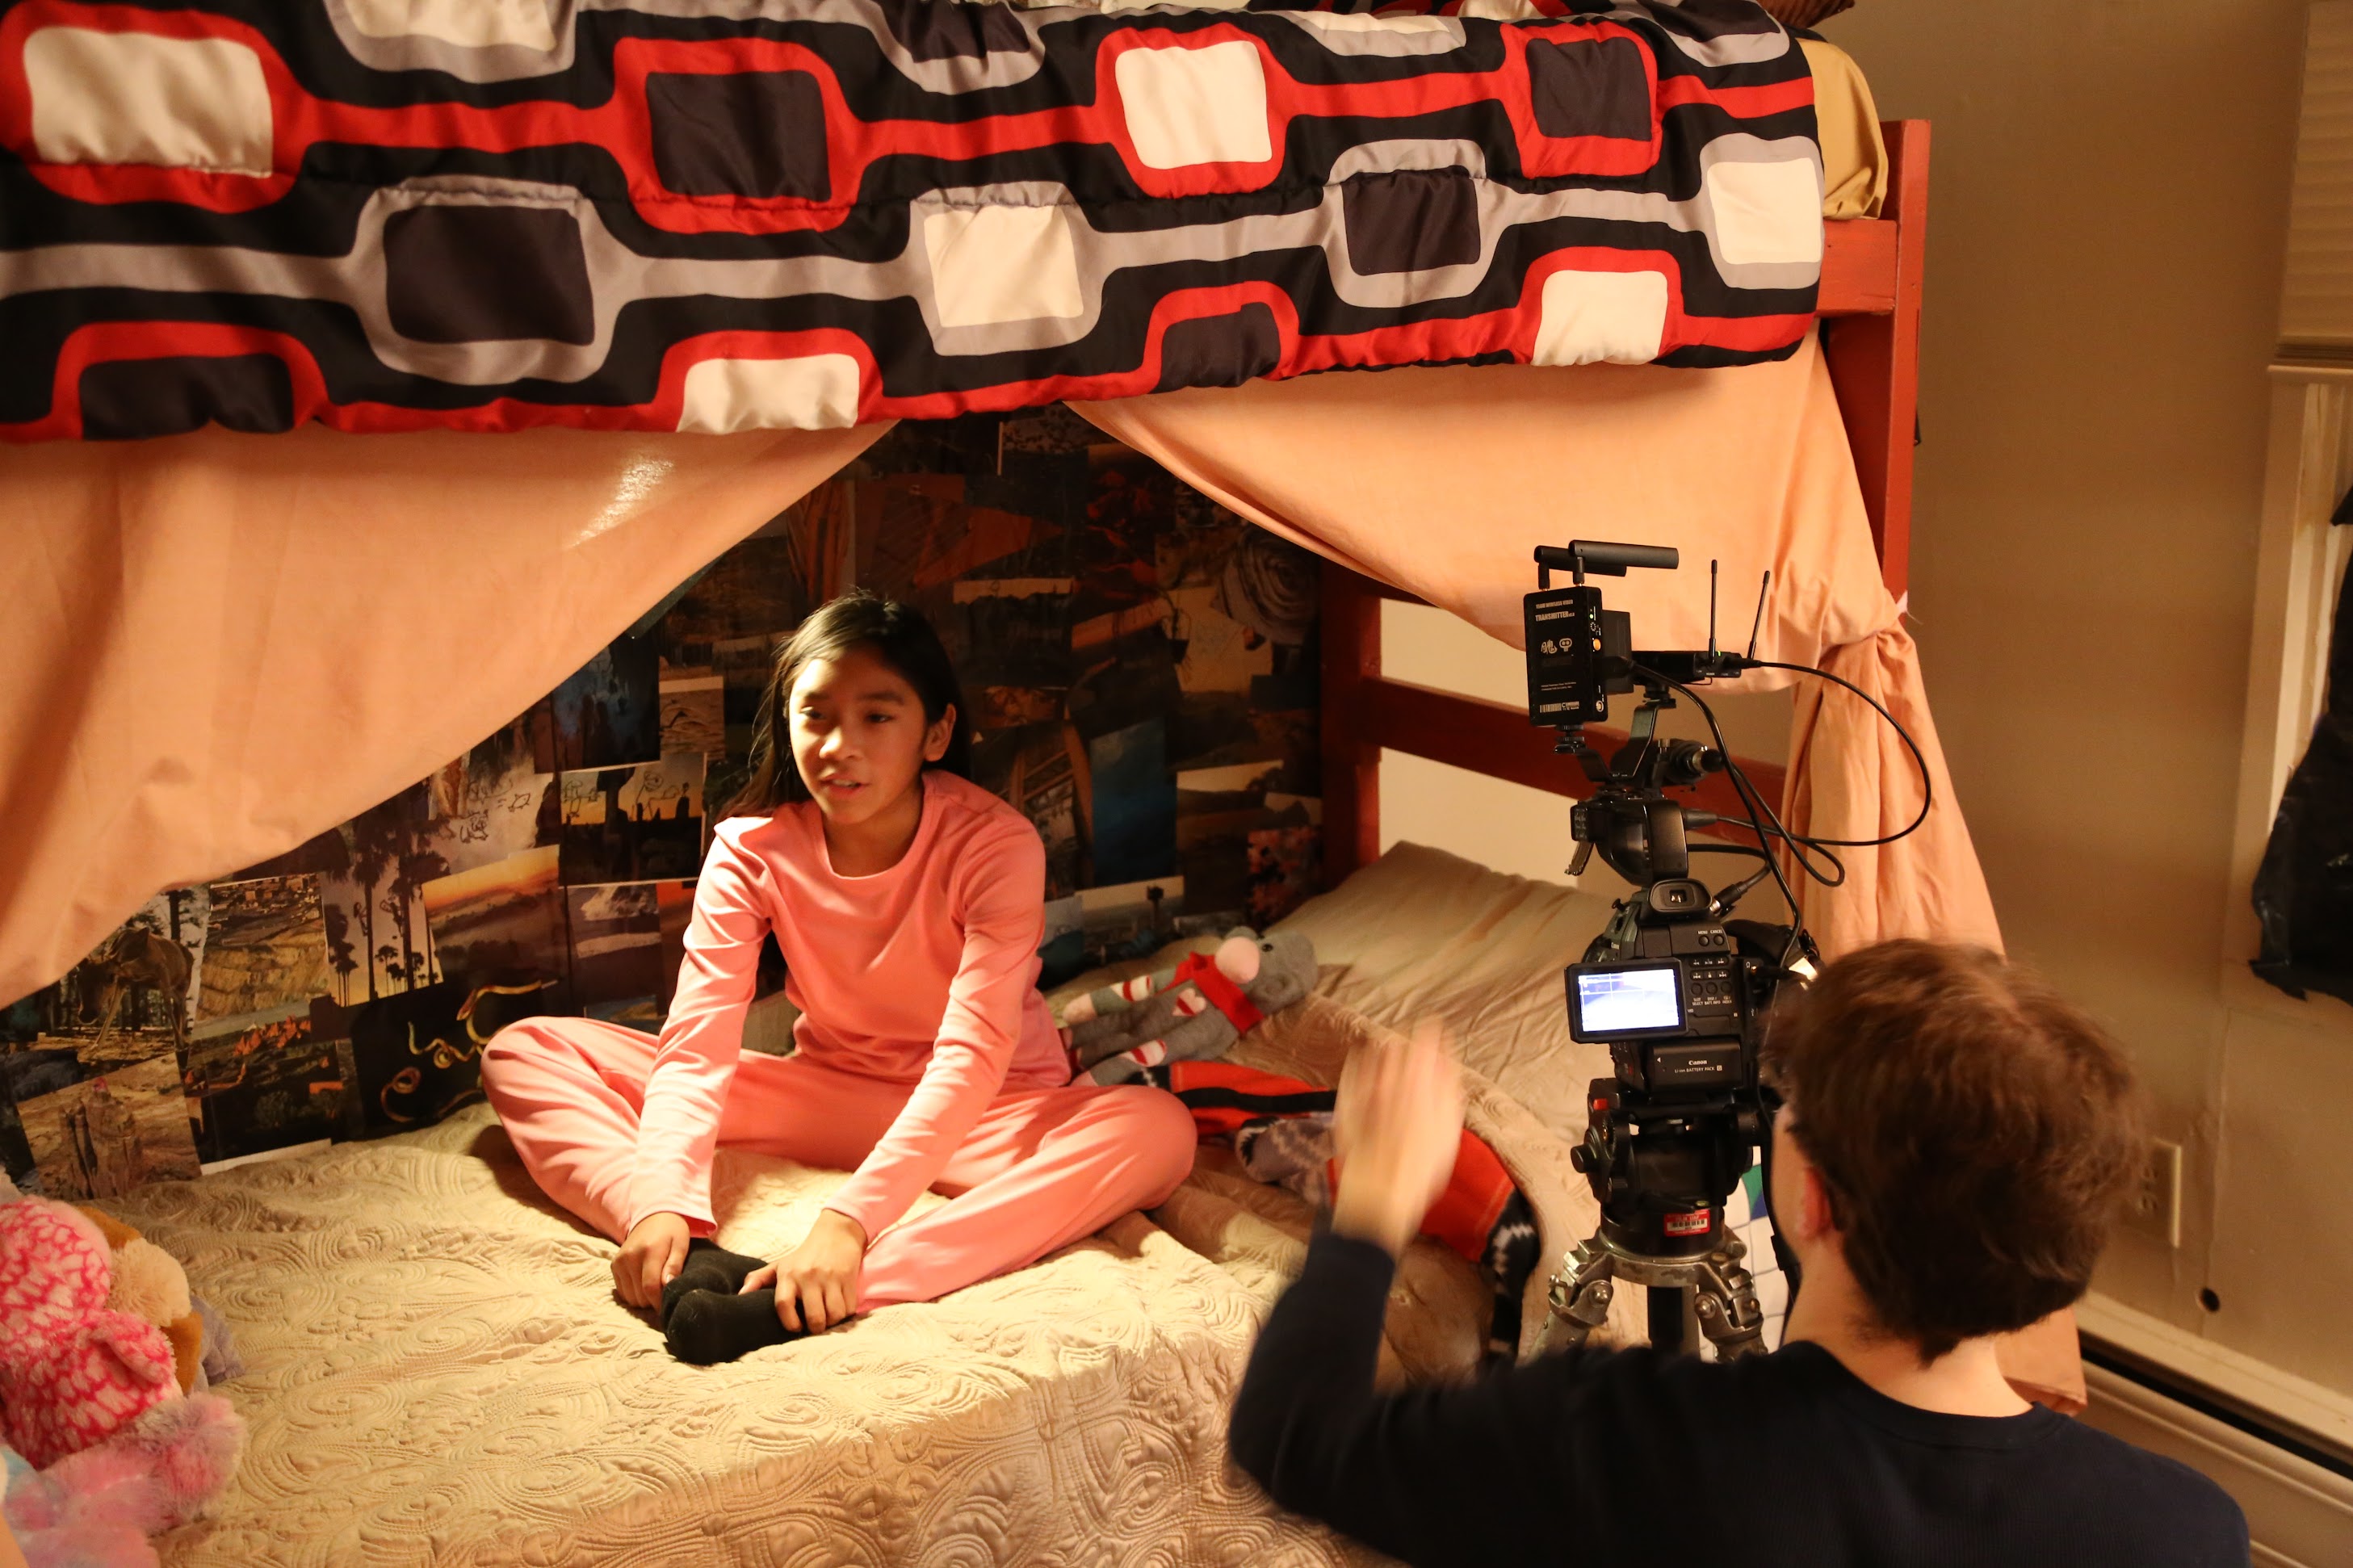 Melora James (CHRISTINA) sits on her bed during filming for a scene from Power of Words. Photo by UAF Theatre and Film